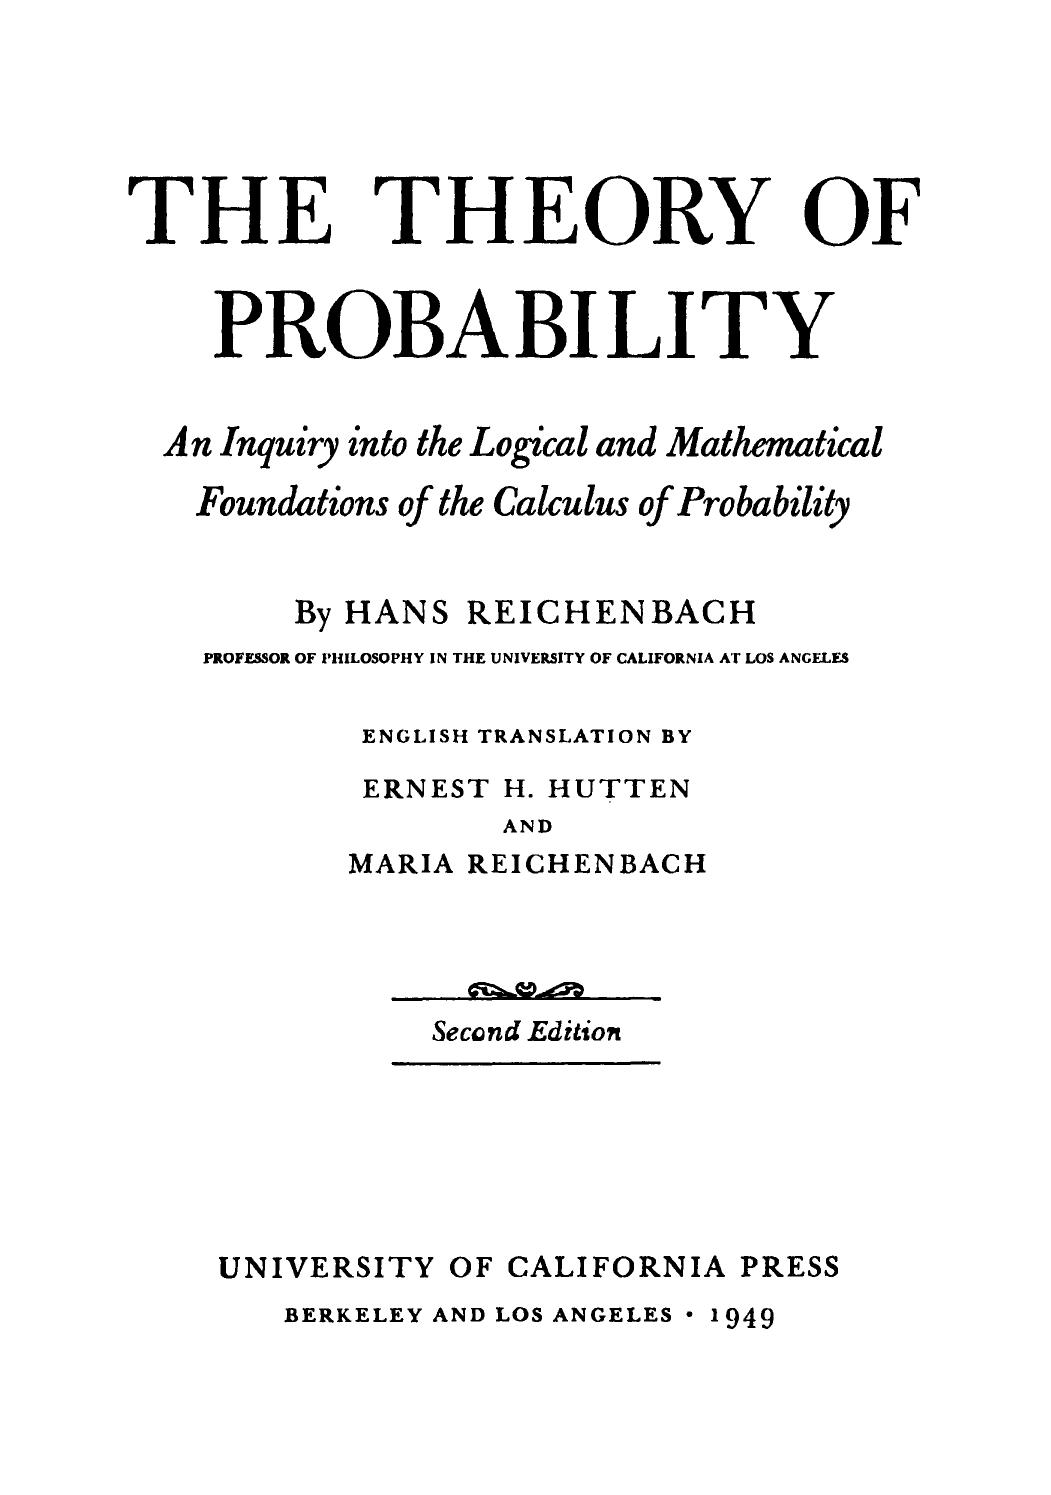 The Theory of Probability An Inquiry into the Logical and Mathematical Foundations of the Calculus of Probability